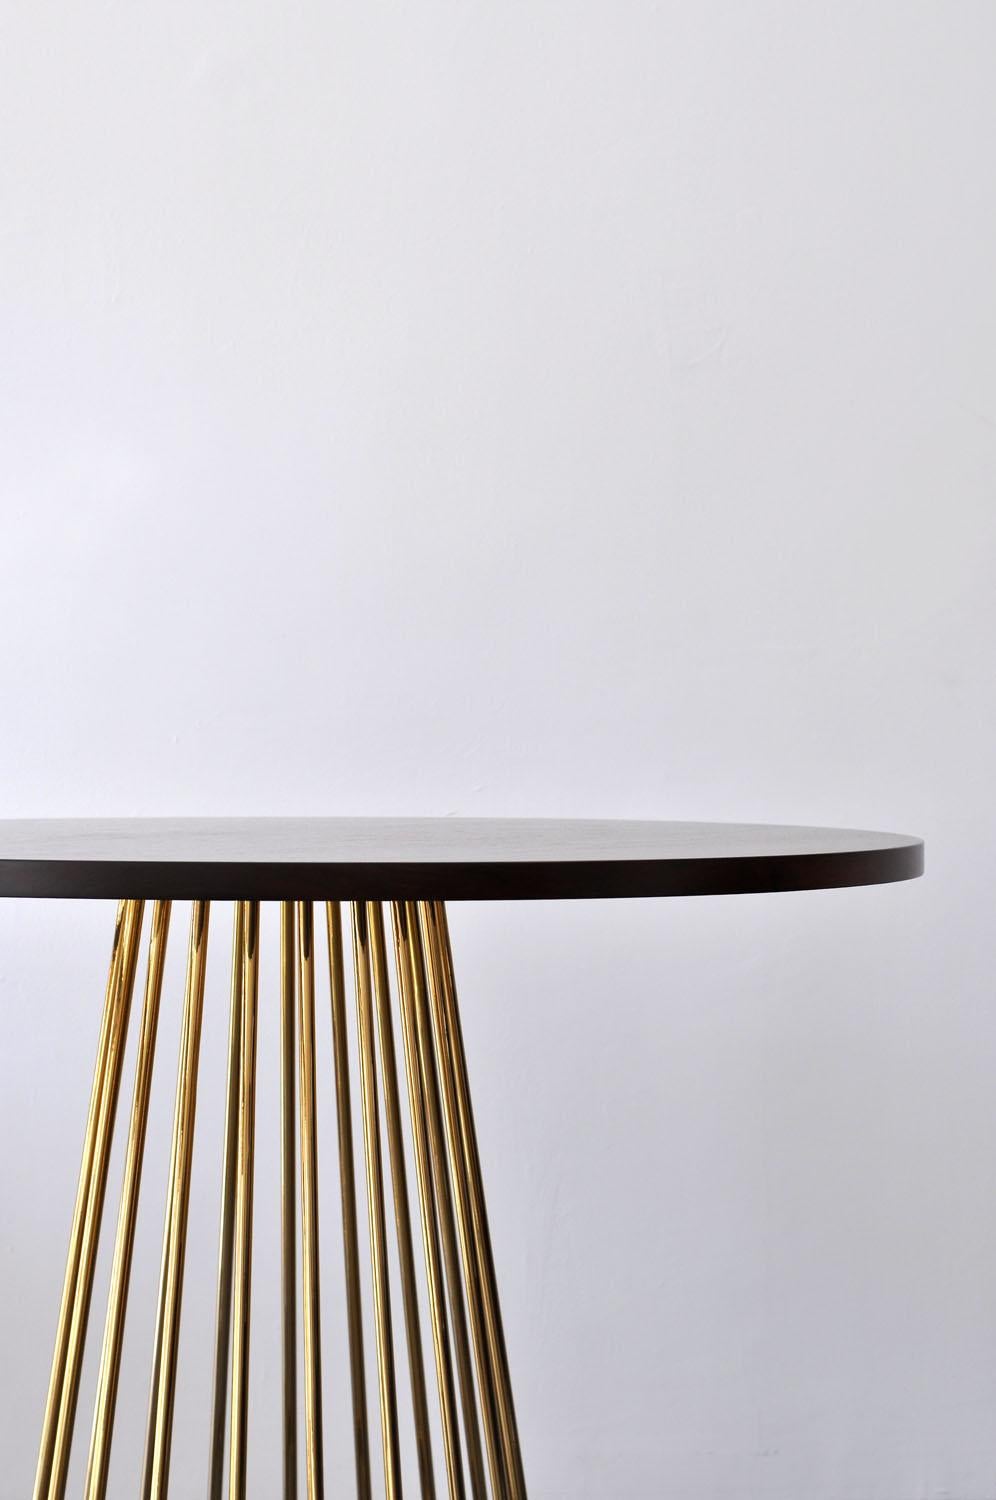 Listed price is for the wired cafe table with a smoked brass base and either walnut, white oak, or ebonized oak wood top. 

Prices exclude packing.

Tapered lengths of metal meet with intention in a modern interpretation of the wiry idea